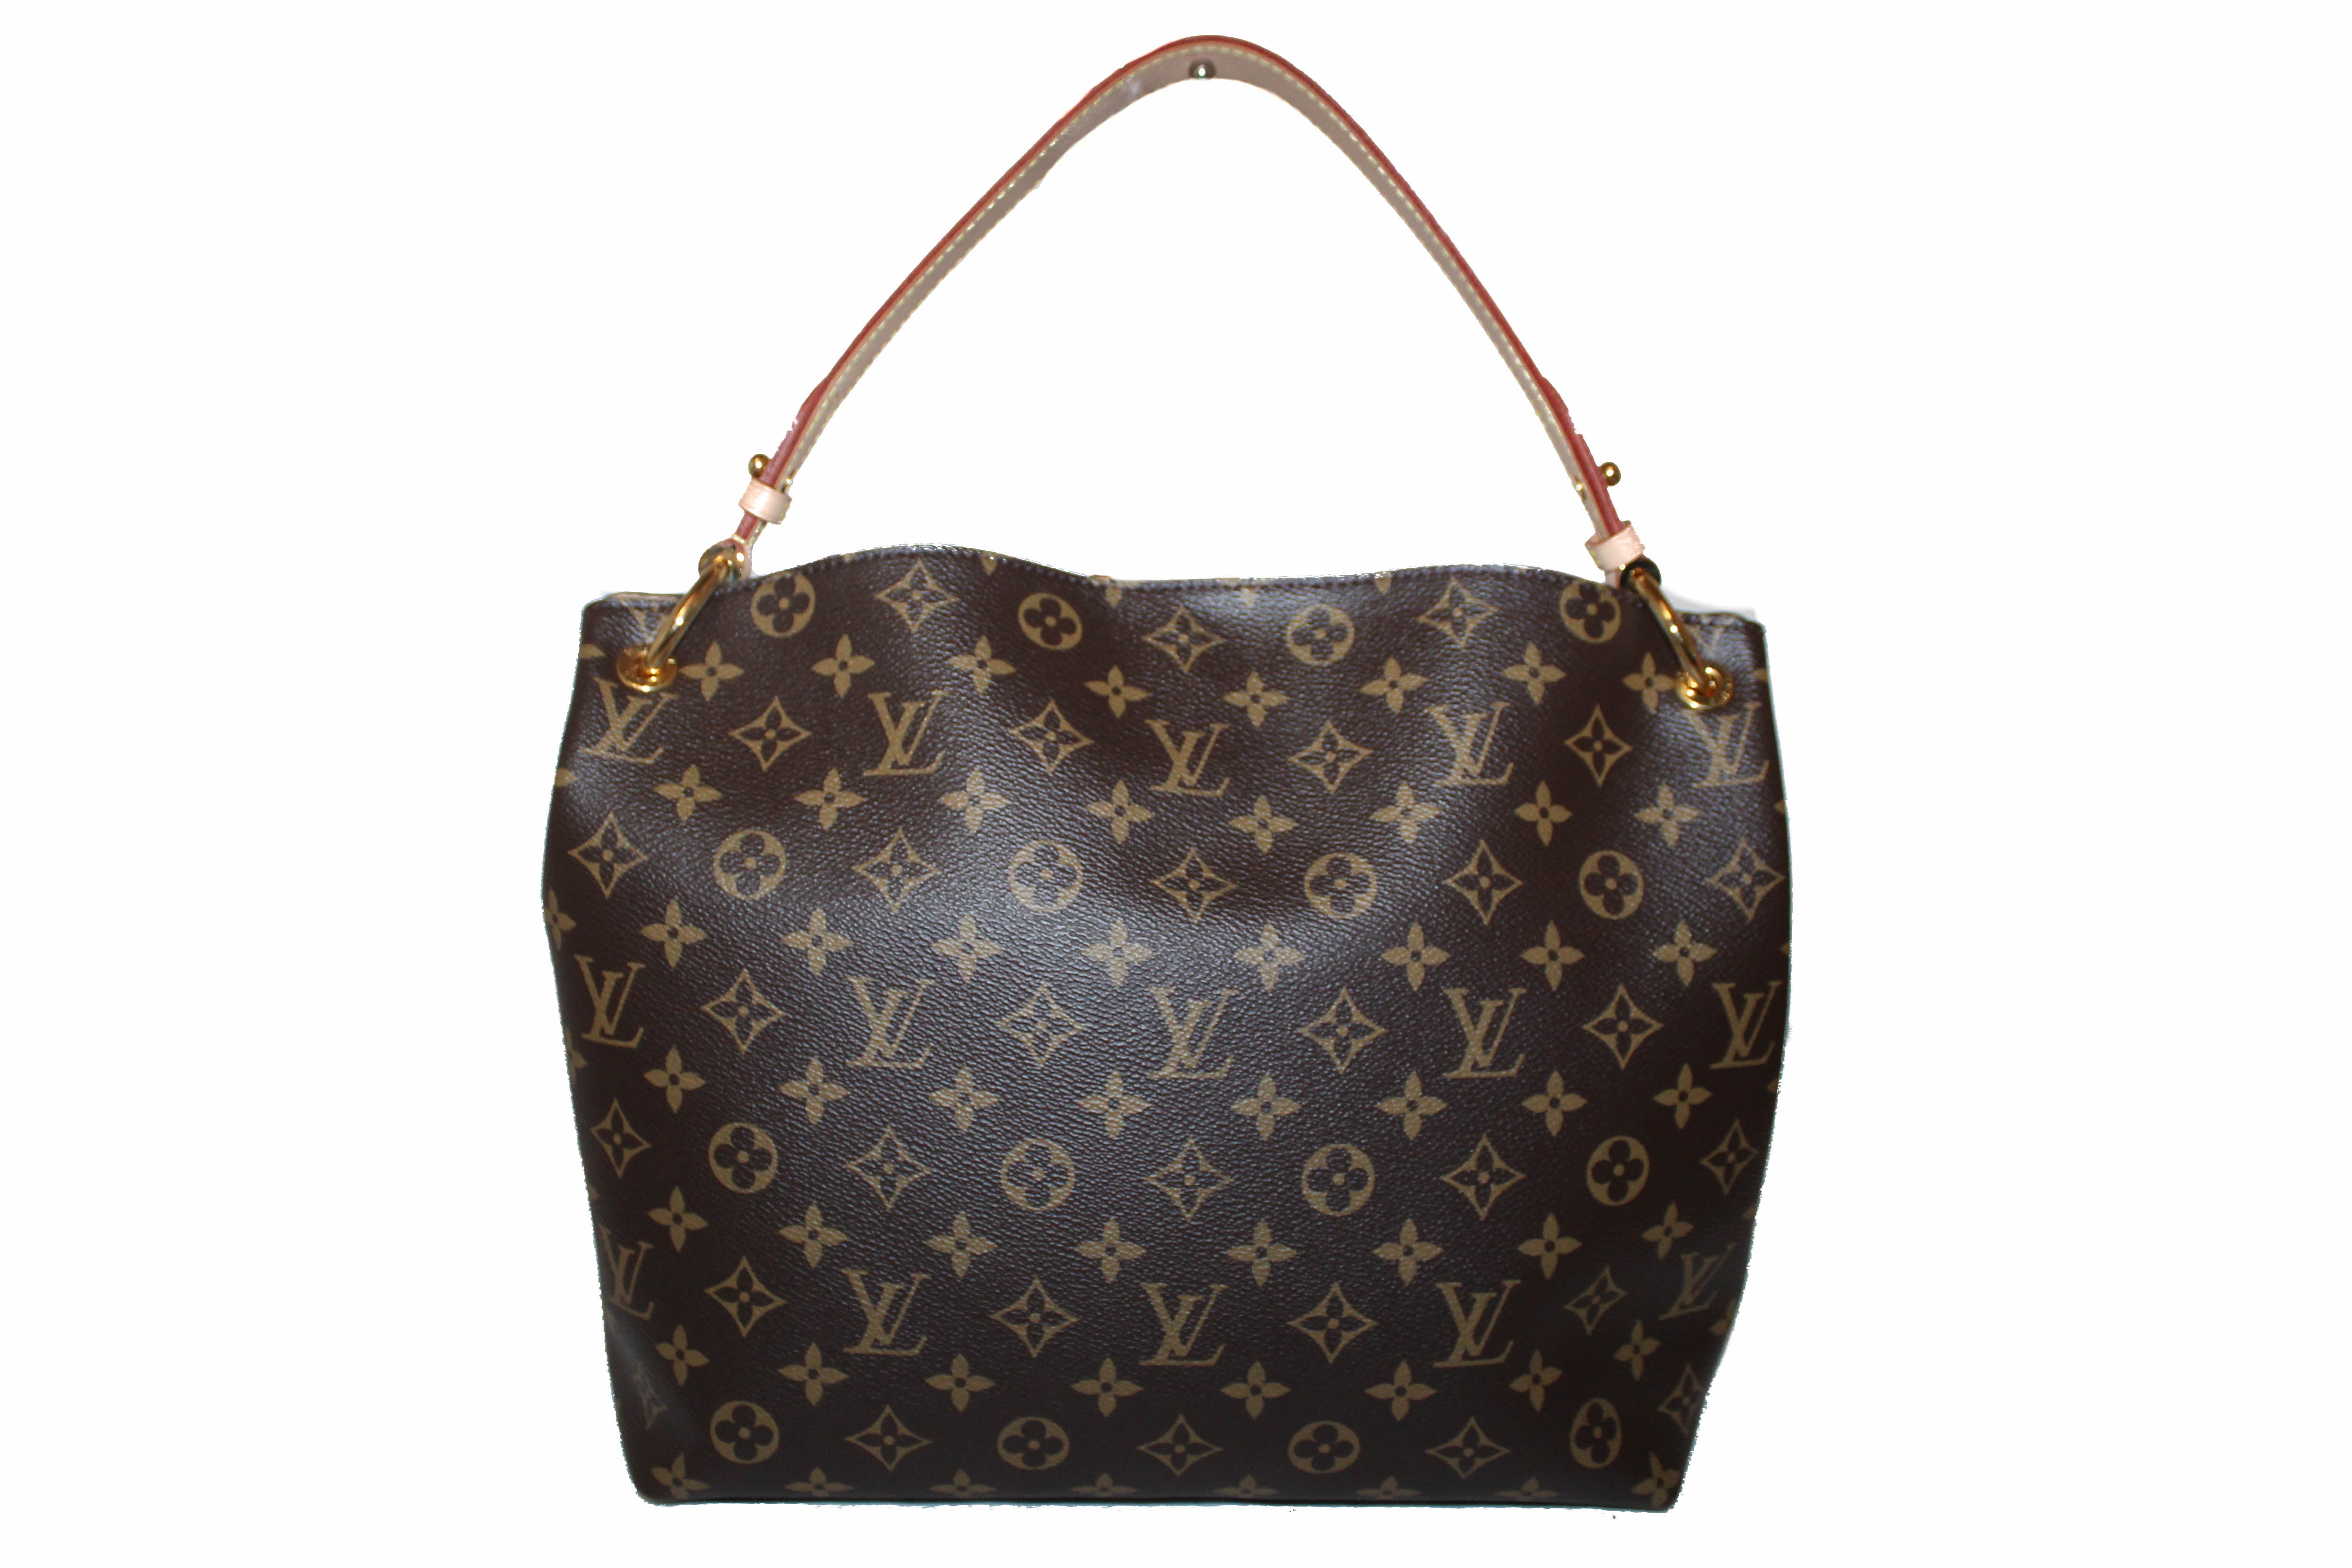 Louis Vuitton Graceful Monogram PM Beige in Coated Canvas/Leather